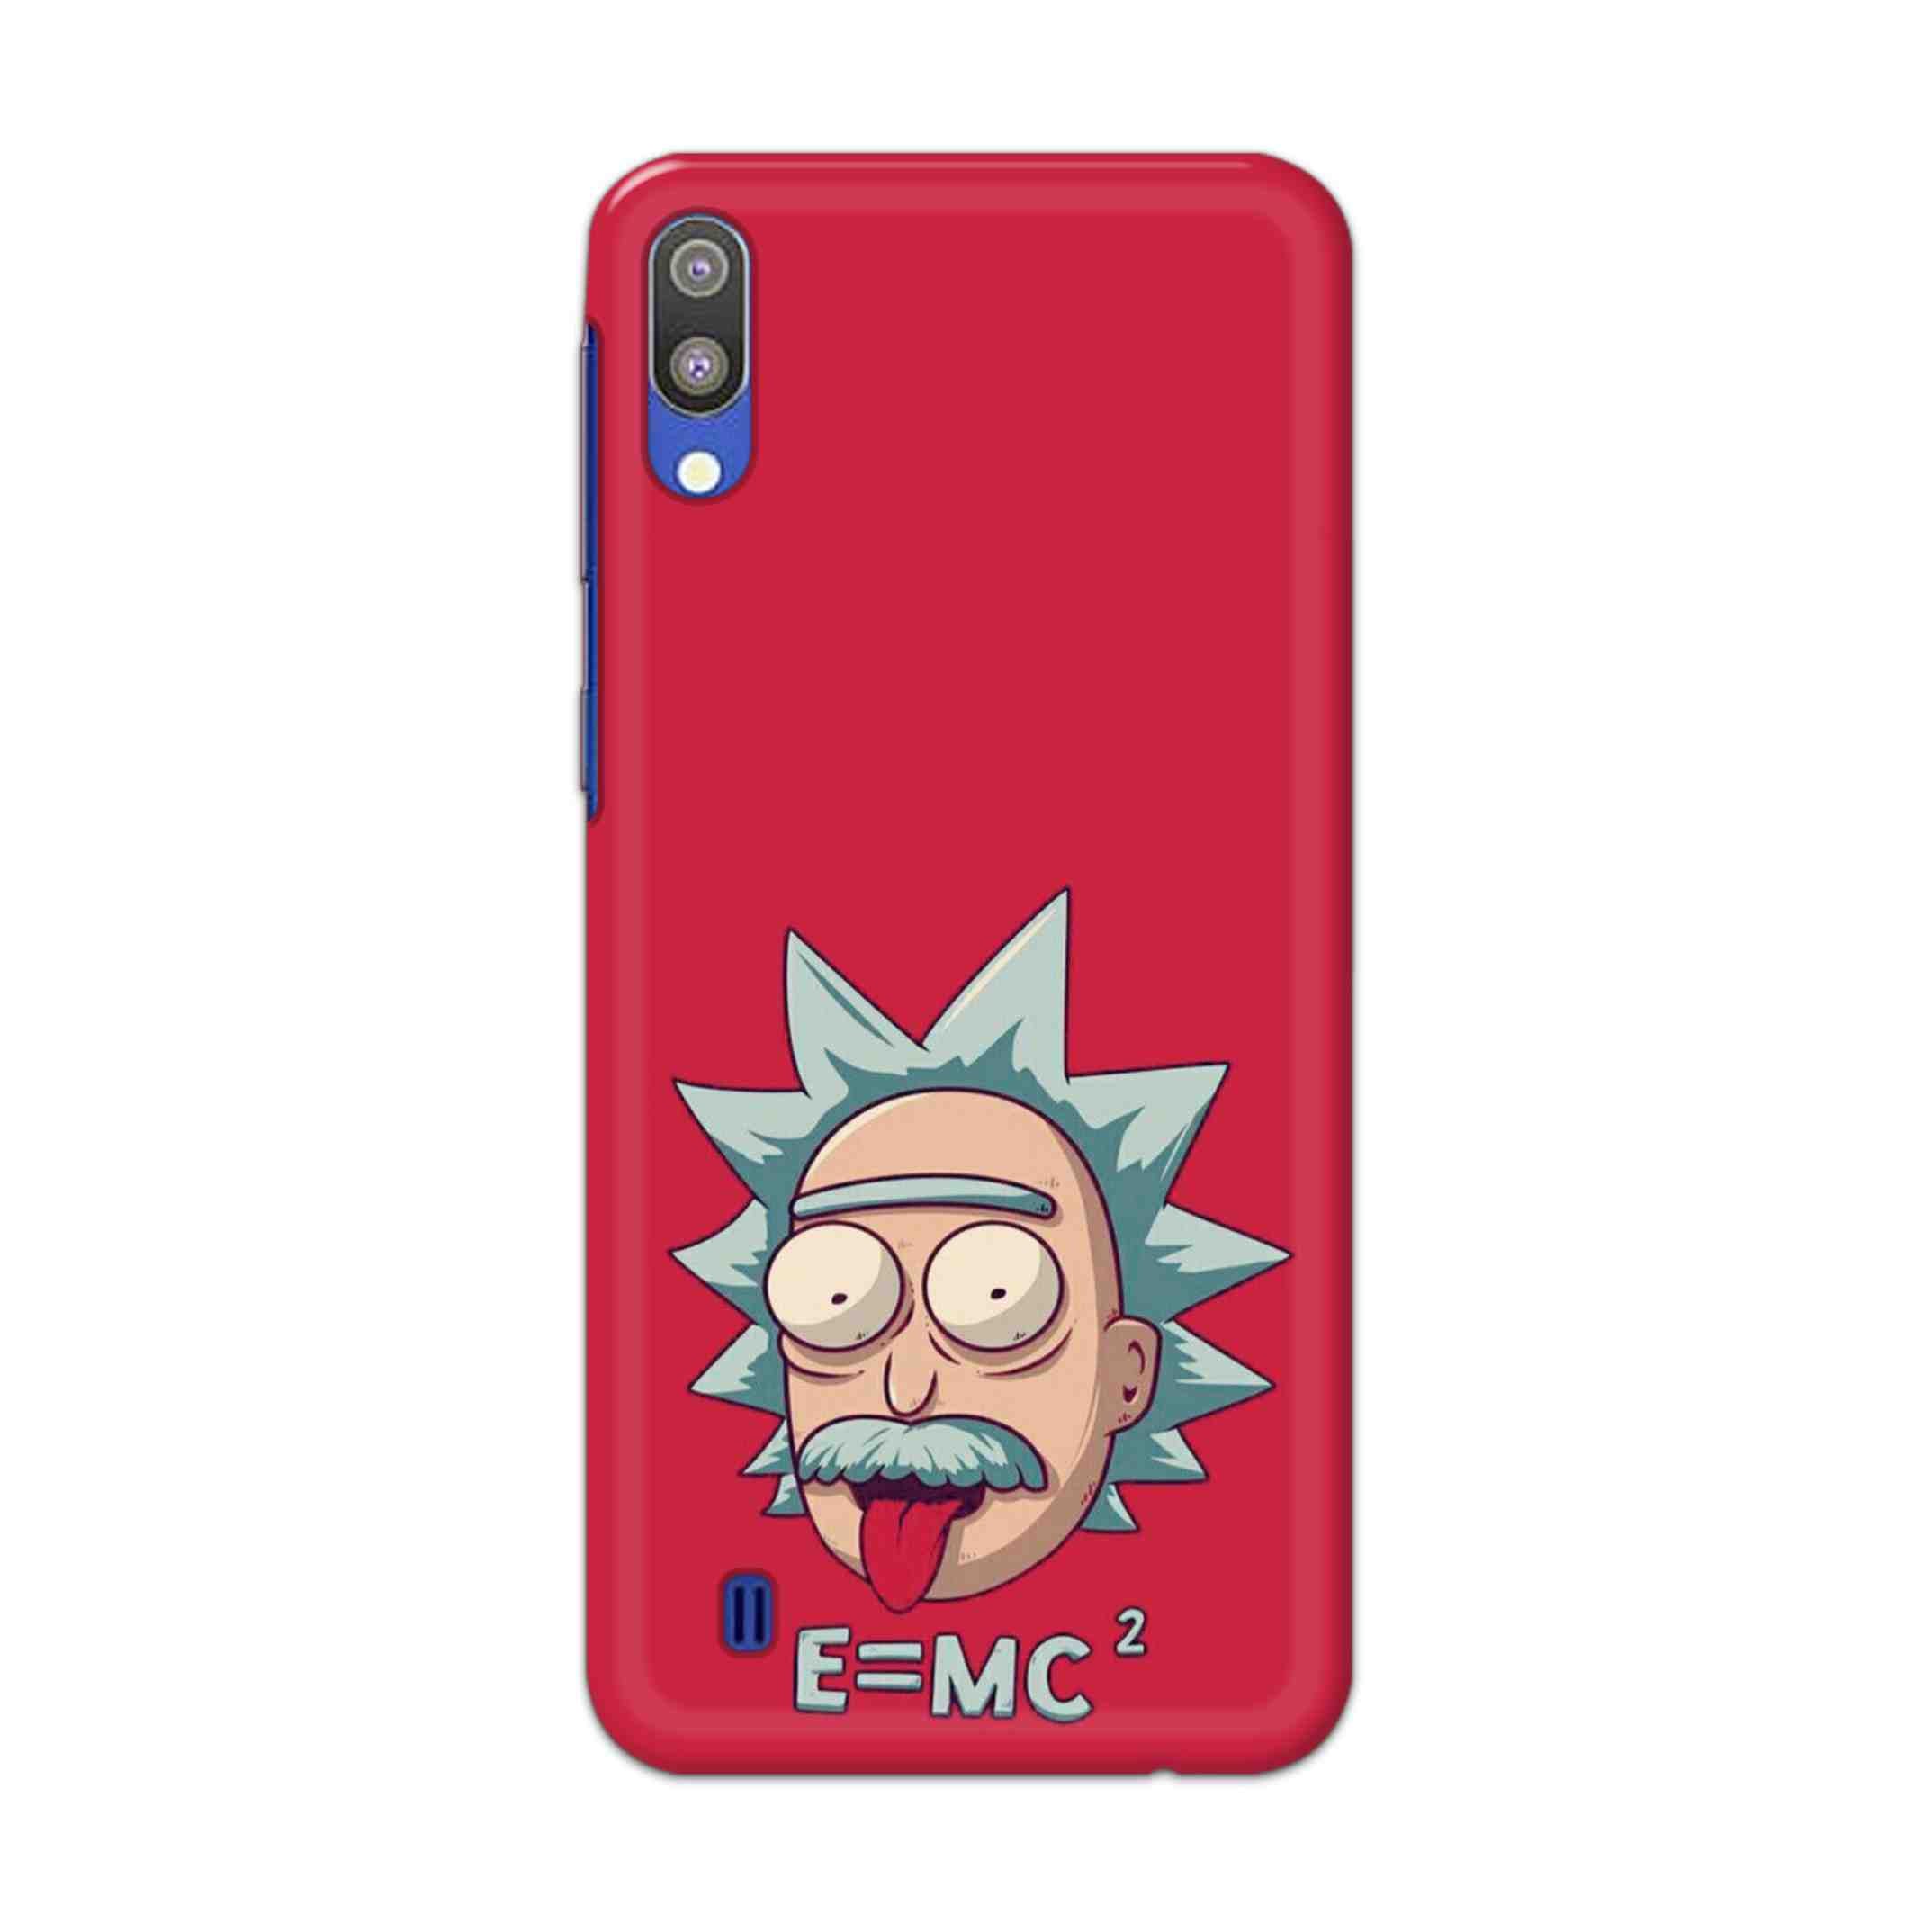 Buy E=Mc Hard Back Mobile Phone Case Cover For Samsung Galaxy M10 Online